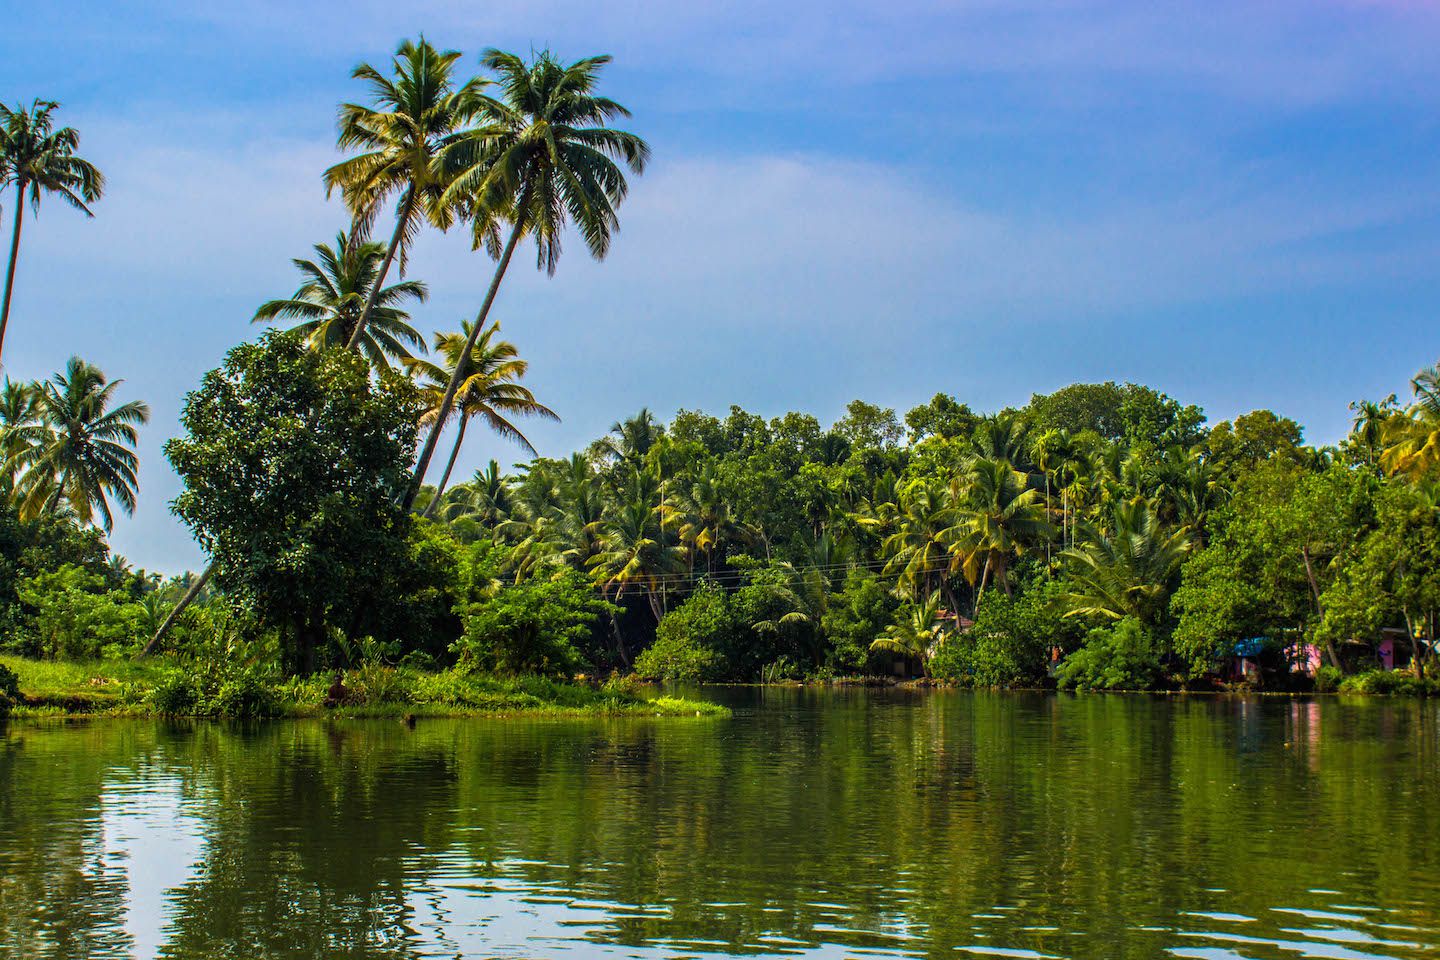 View of the forest along the canals of the Kerala Backwaters, Kochi, India